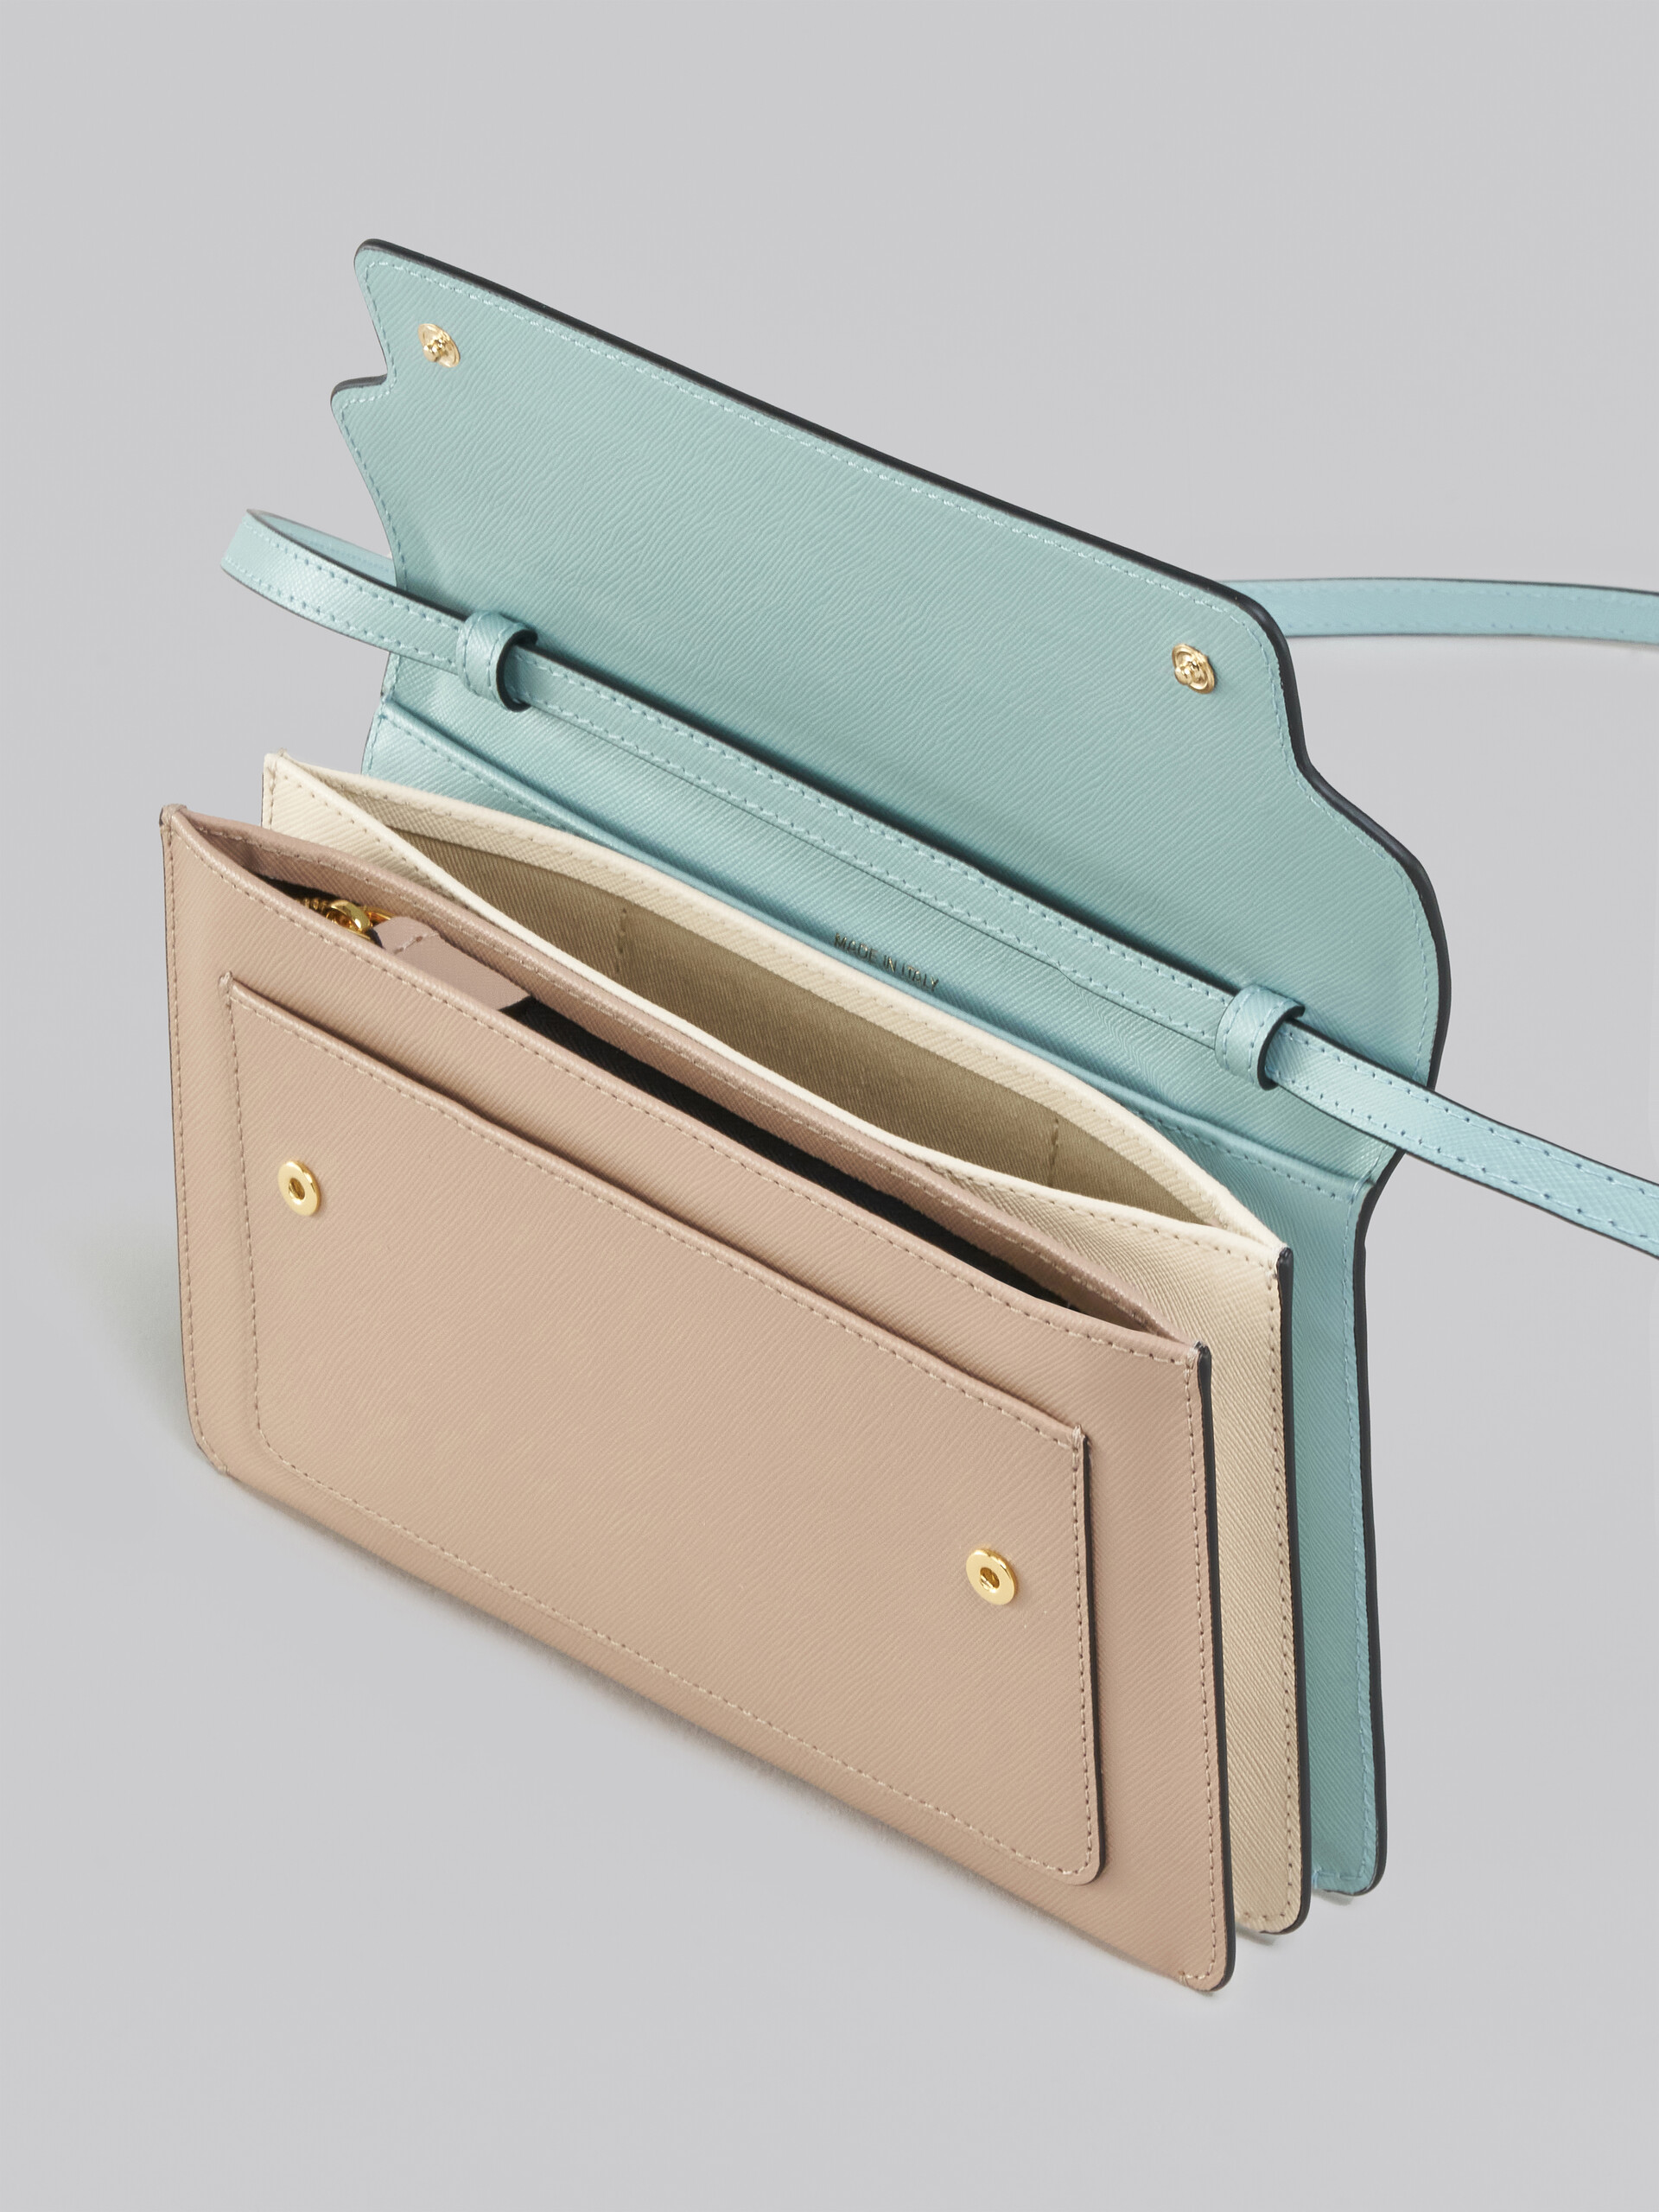 Trunk Clutch in light blue beige and white saffiano leather - Pochette - Image 4